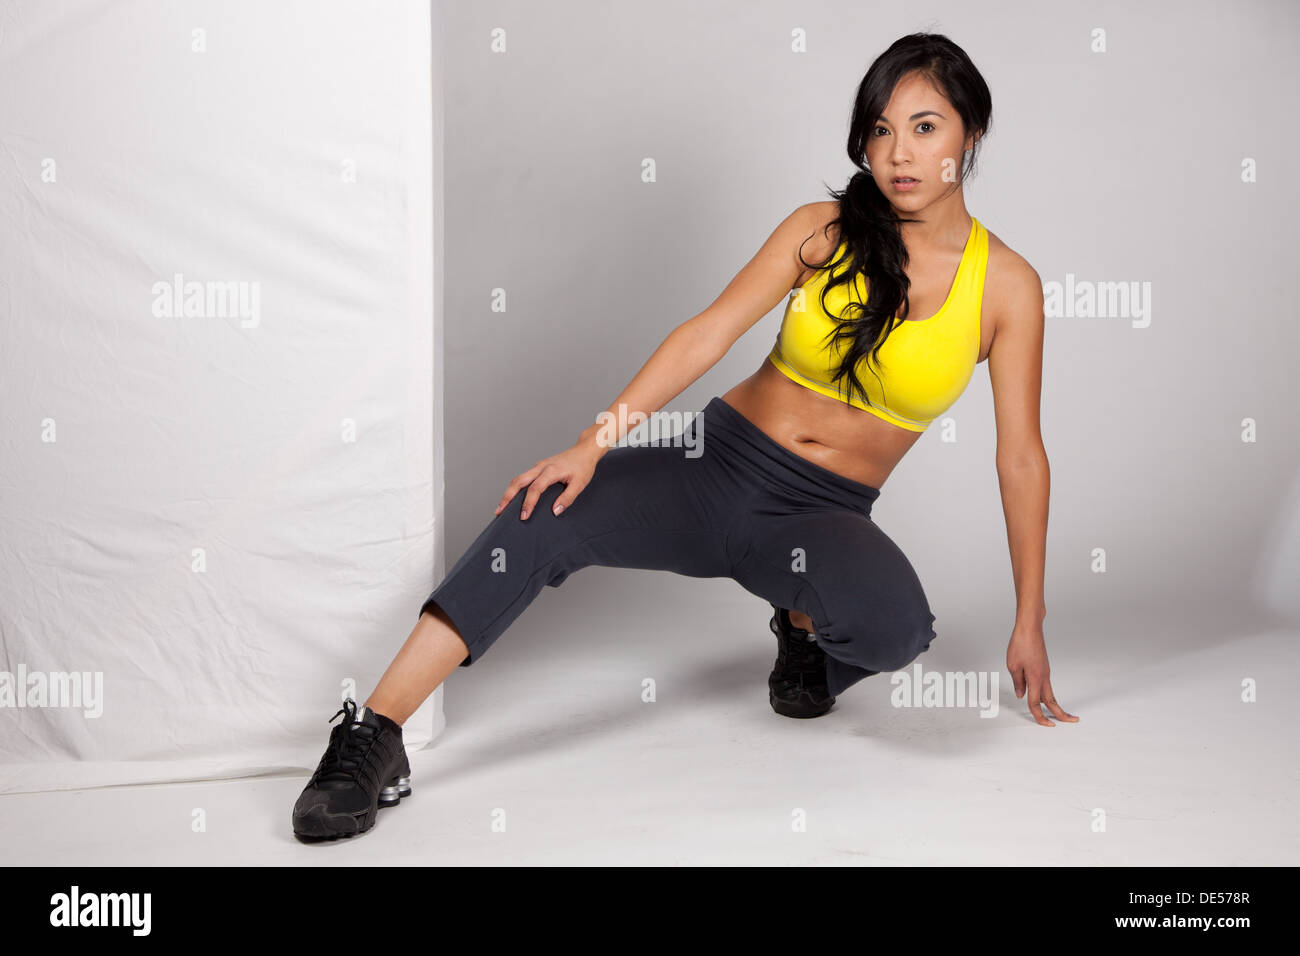 Pretty Hispanic lady wearing work out clothes and posing Stock Photo